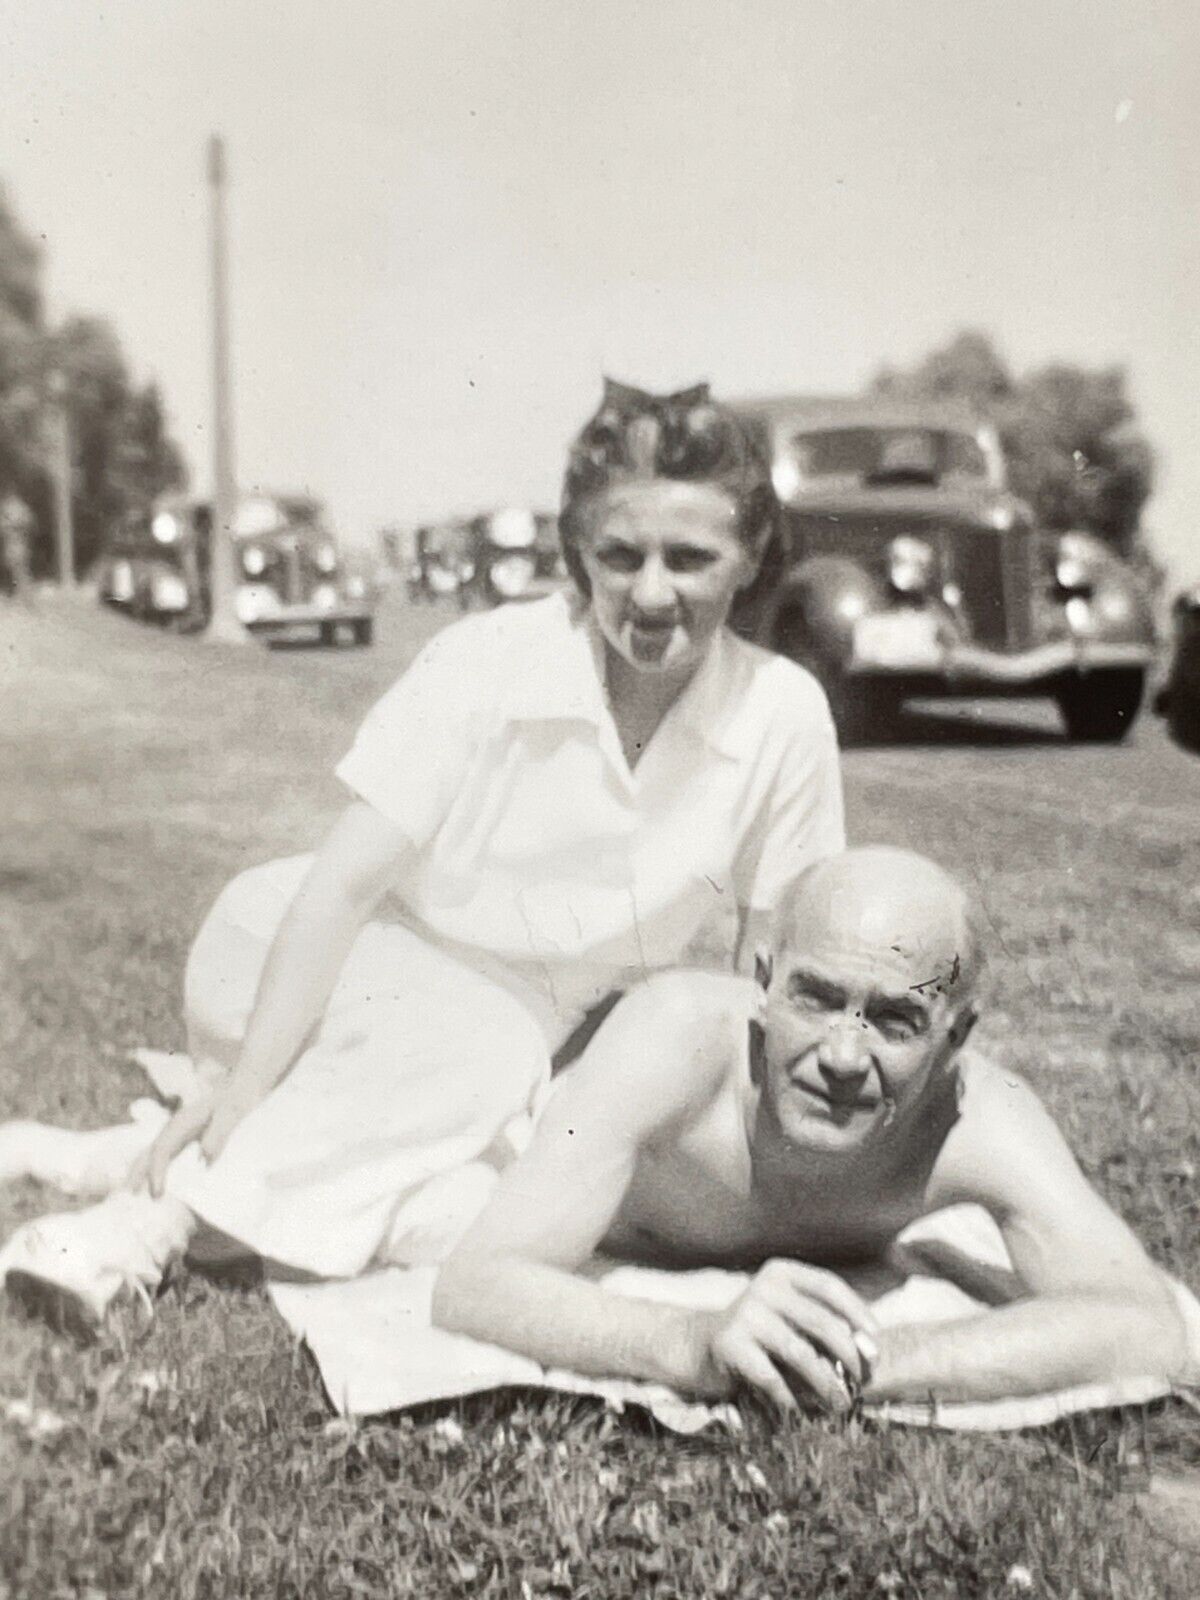 V9 Photograph Handsome Old Shirtless Bald Man  1940 Old Cars Pretty Young Wife